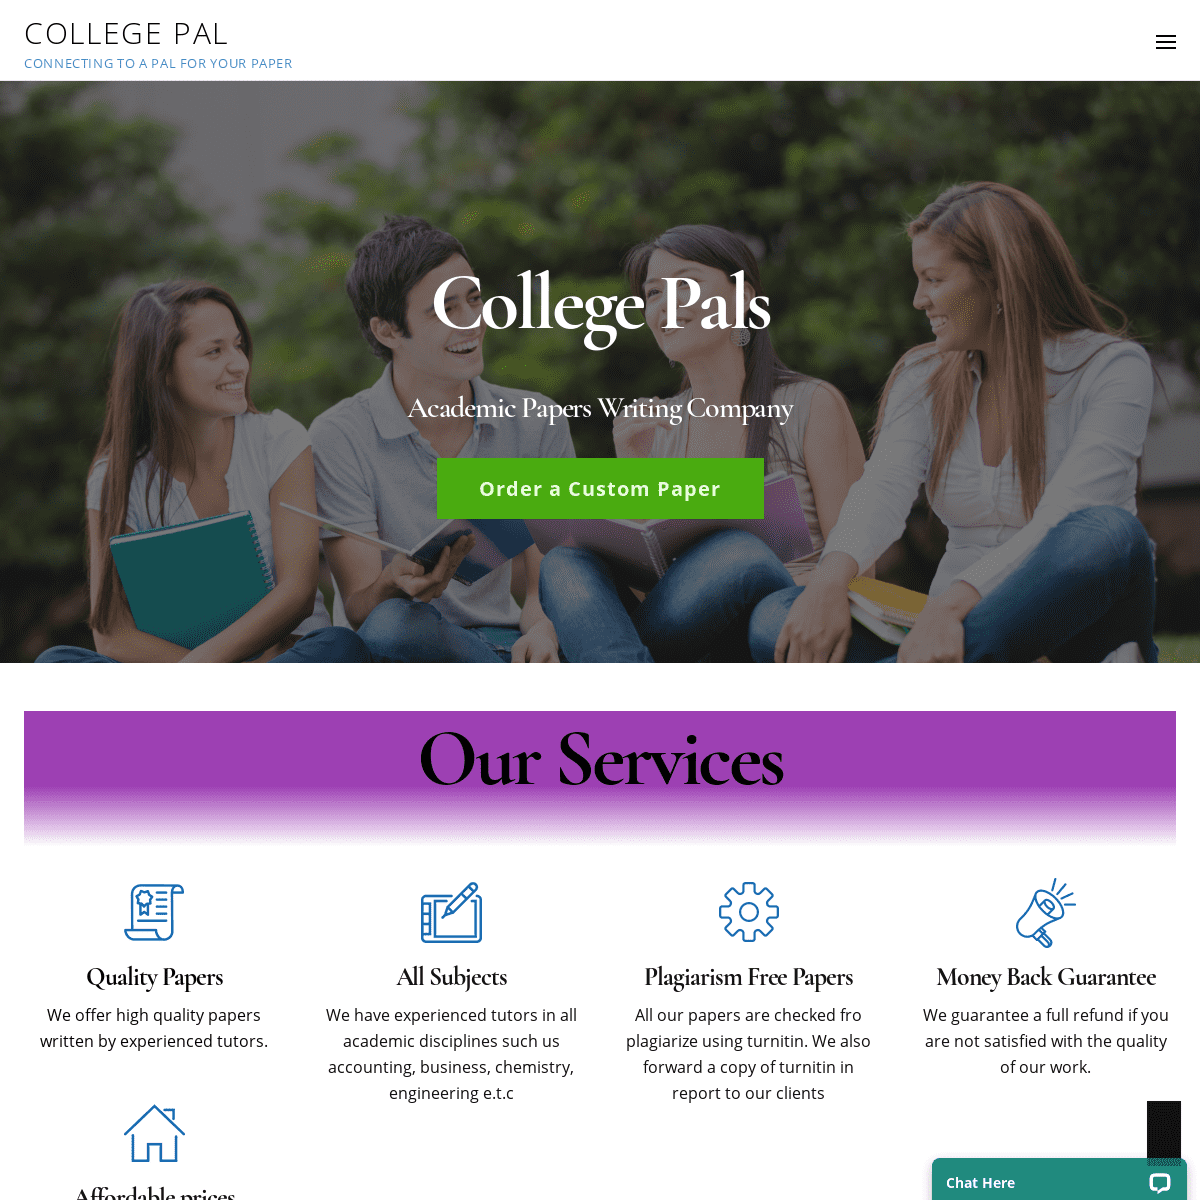 A complete backup of https://collepals.com